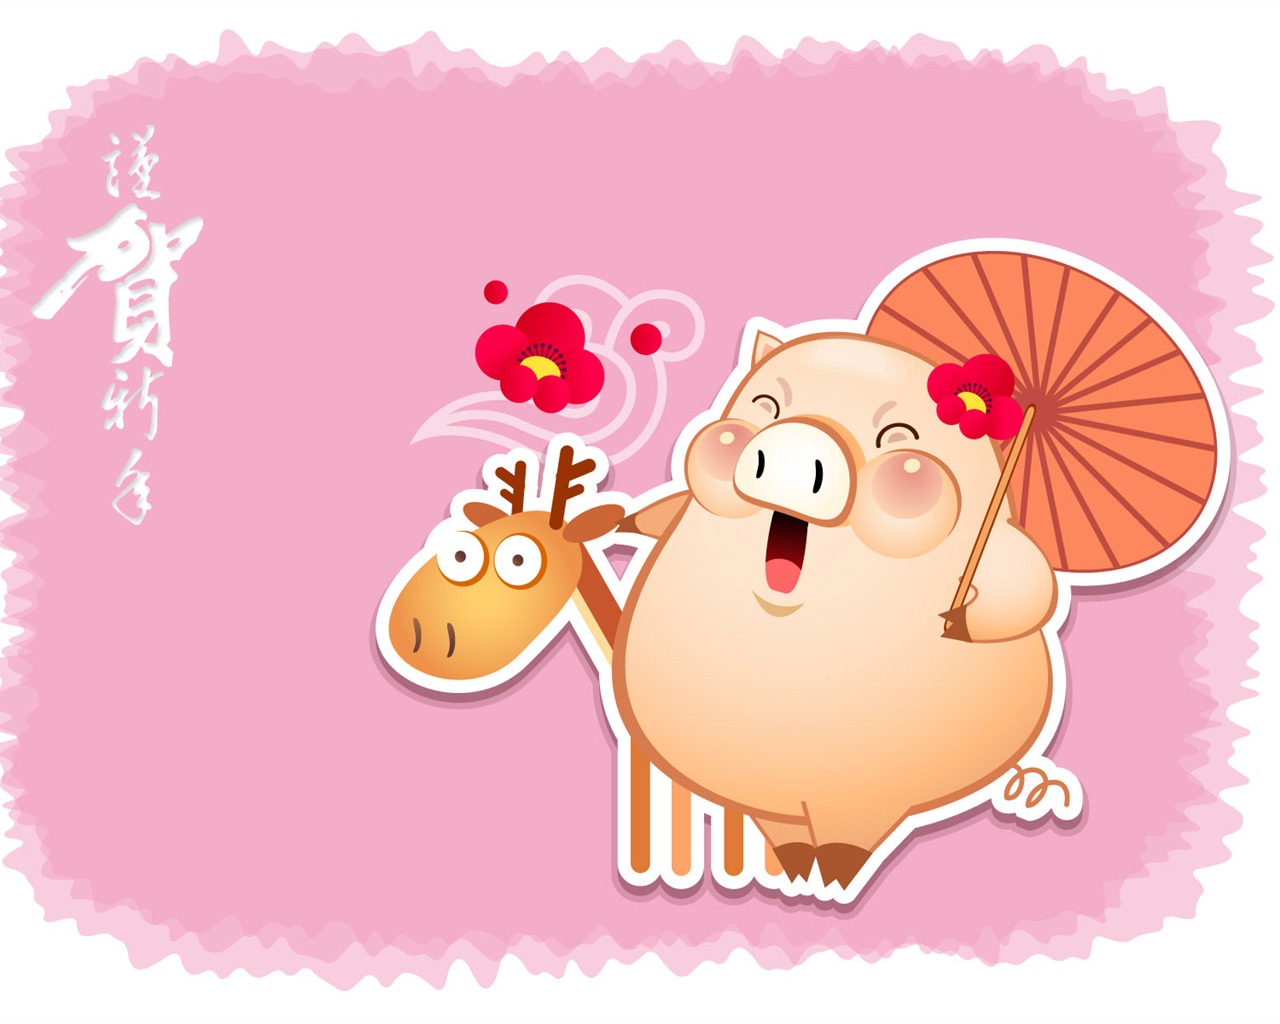 Year of the Pig Theme Wallpaper #5 - 1280x1024